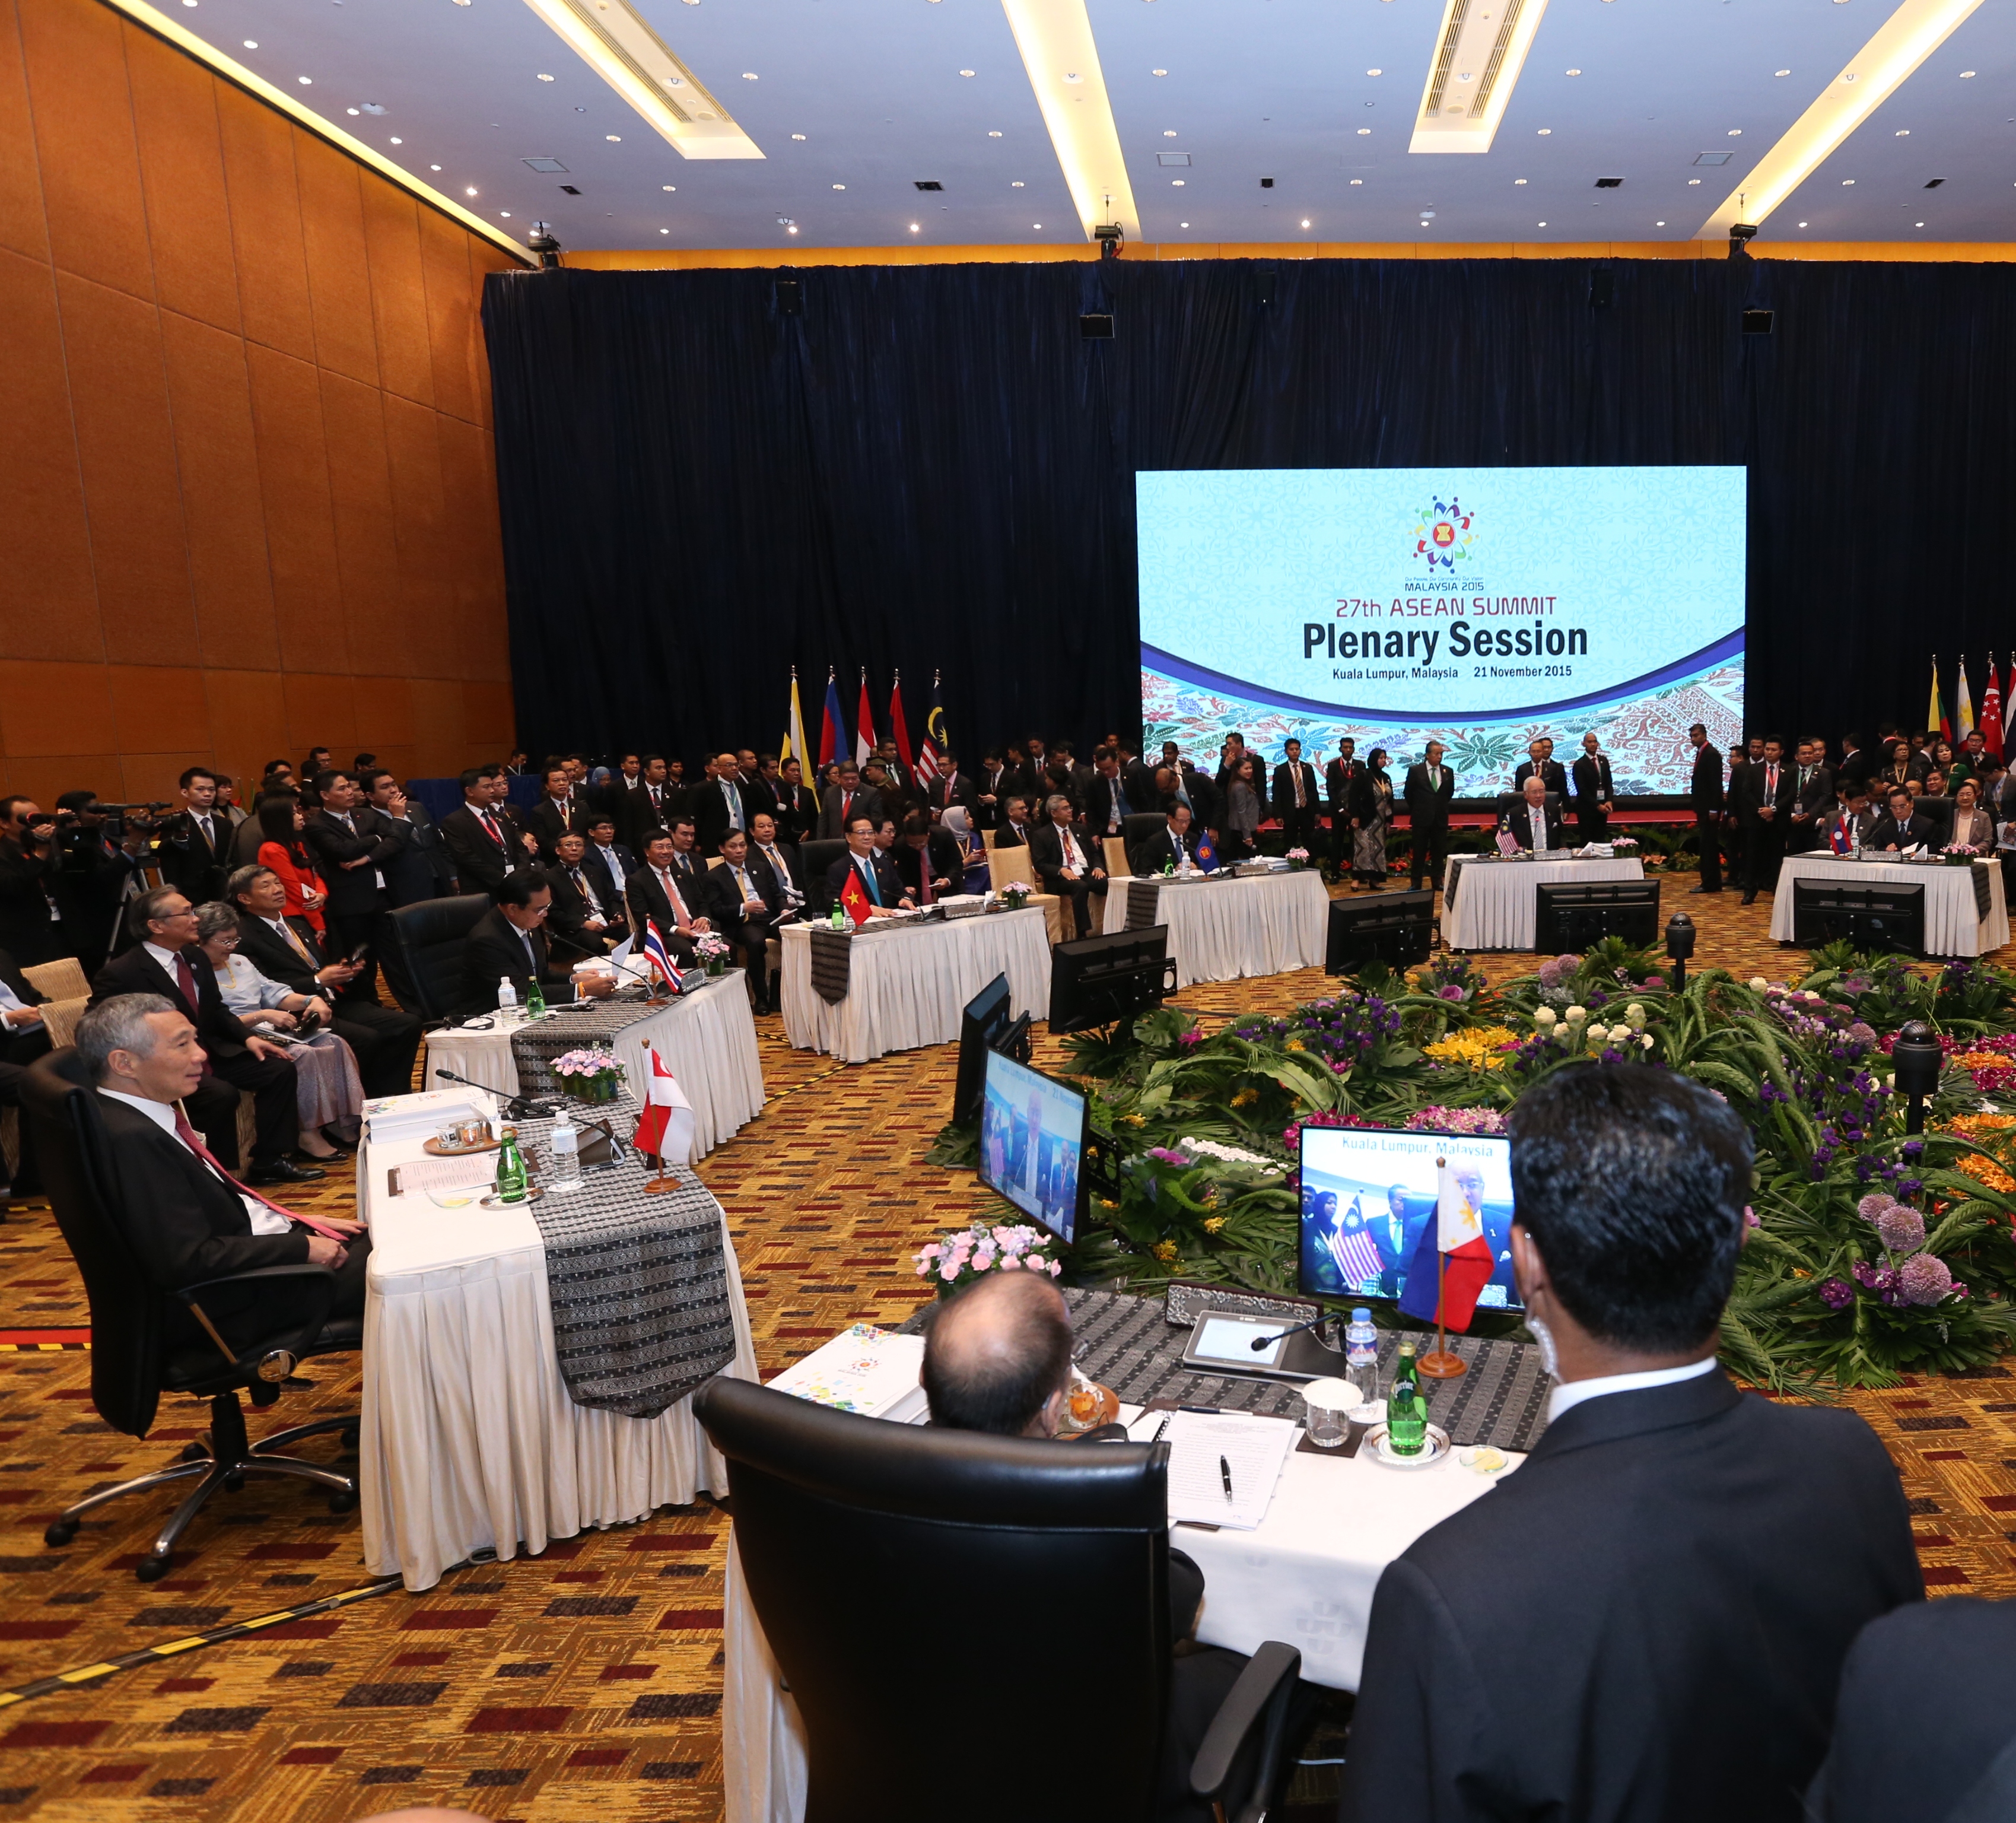 Prime Minister Lee Hsien Loong at the 27th ASEAN Summit in Kuala Lumpur in Nov 2015 (MCI Photo by LH Goh)